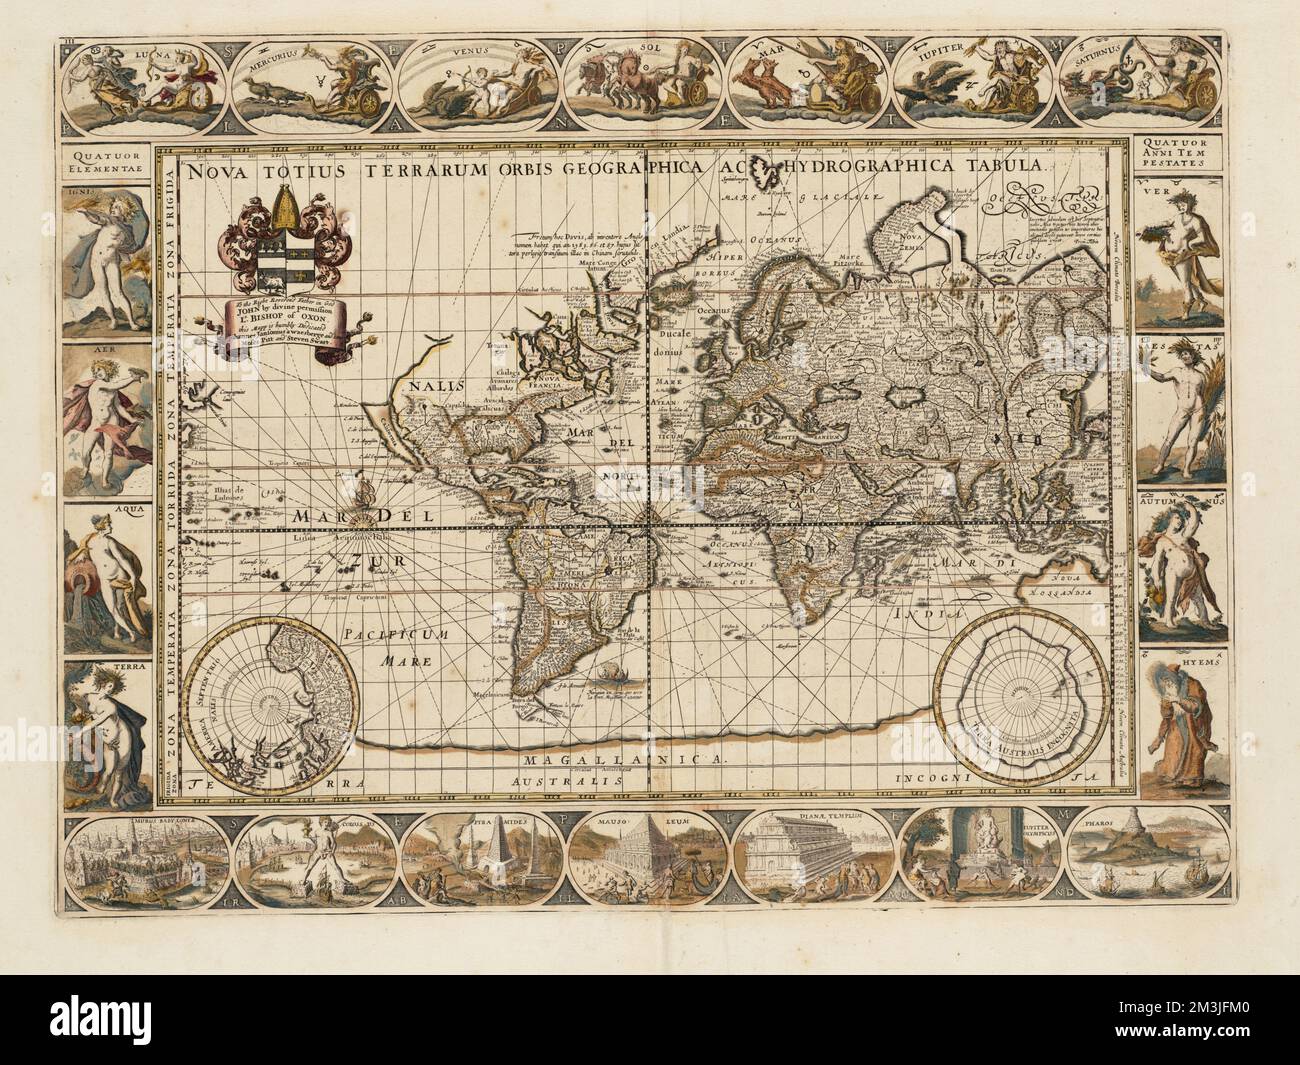 Nova totius terrarum orbis geographica ac hydrographica tabula , World maps, Early works to 1800 Norman B. Leventhal Map Center Collection Stock Photo